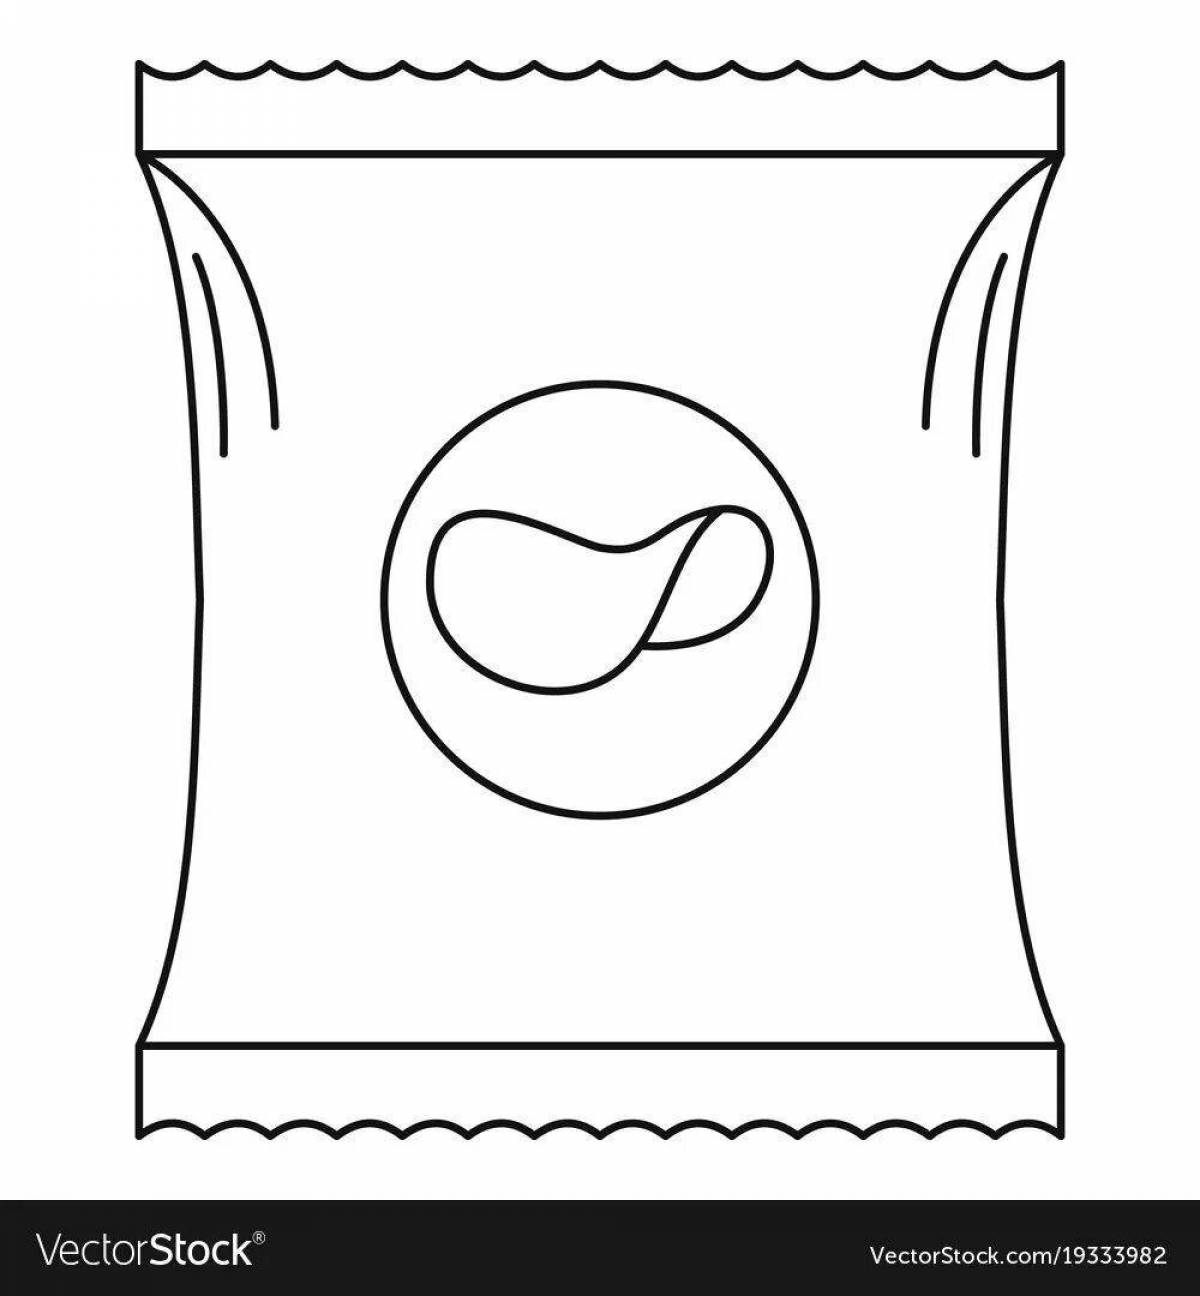 Coloring page charming lace chips